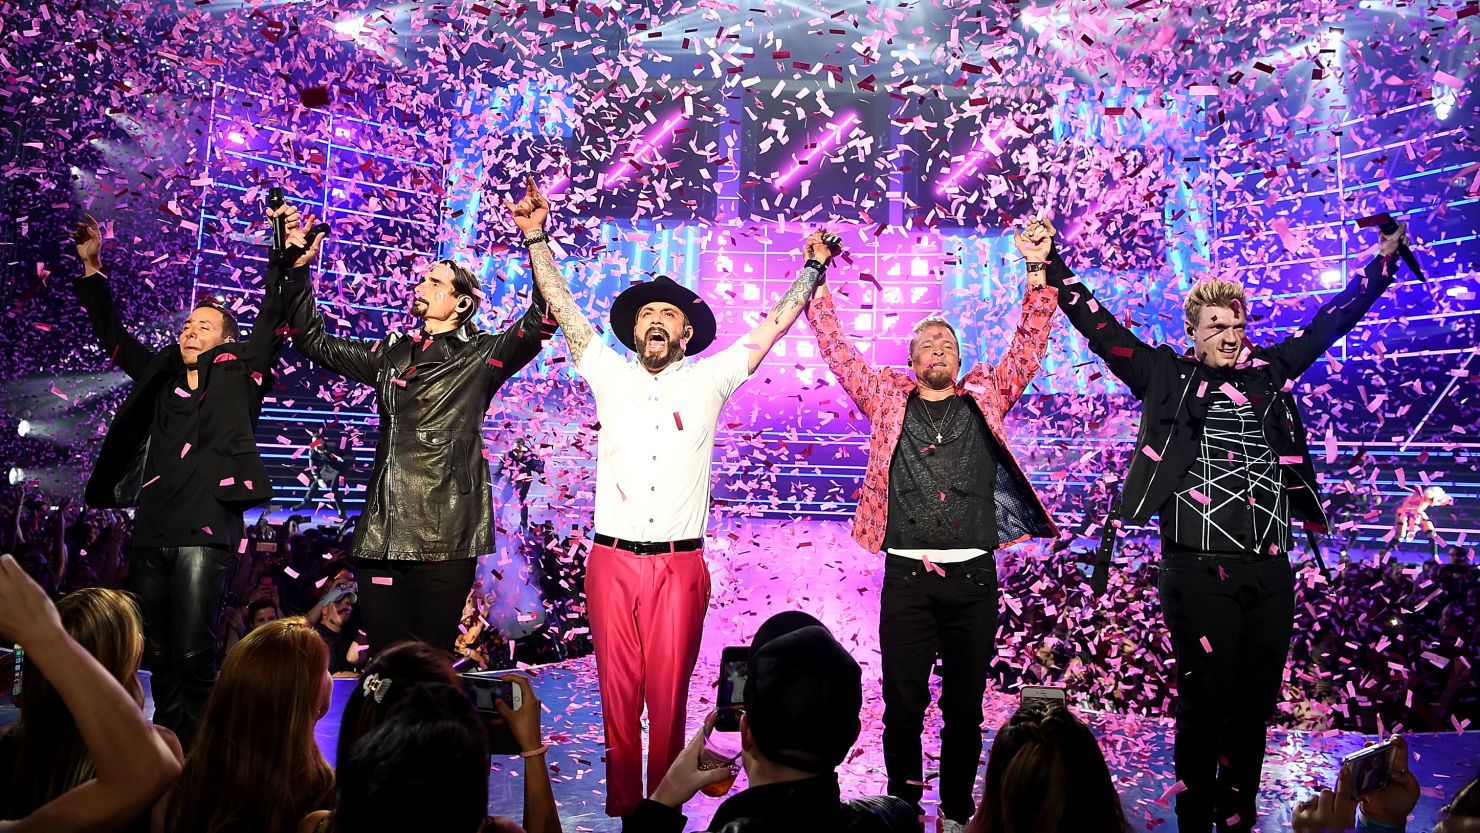 Singers Howie Dorough, Kevin Richardson, AJ McLean, Brian Littrell and Nick Carter of the Backstreet Boys perform during the launch of the group's residency "Larger Than Life" at The Axis at Planet Hollywood Resort & Casino on March 1, 2017 in Las Vegas, Nevada.